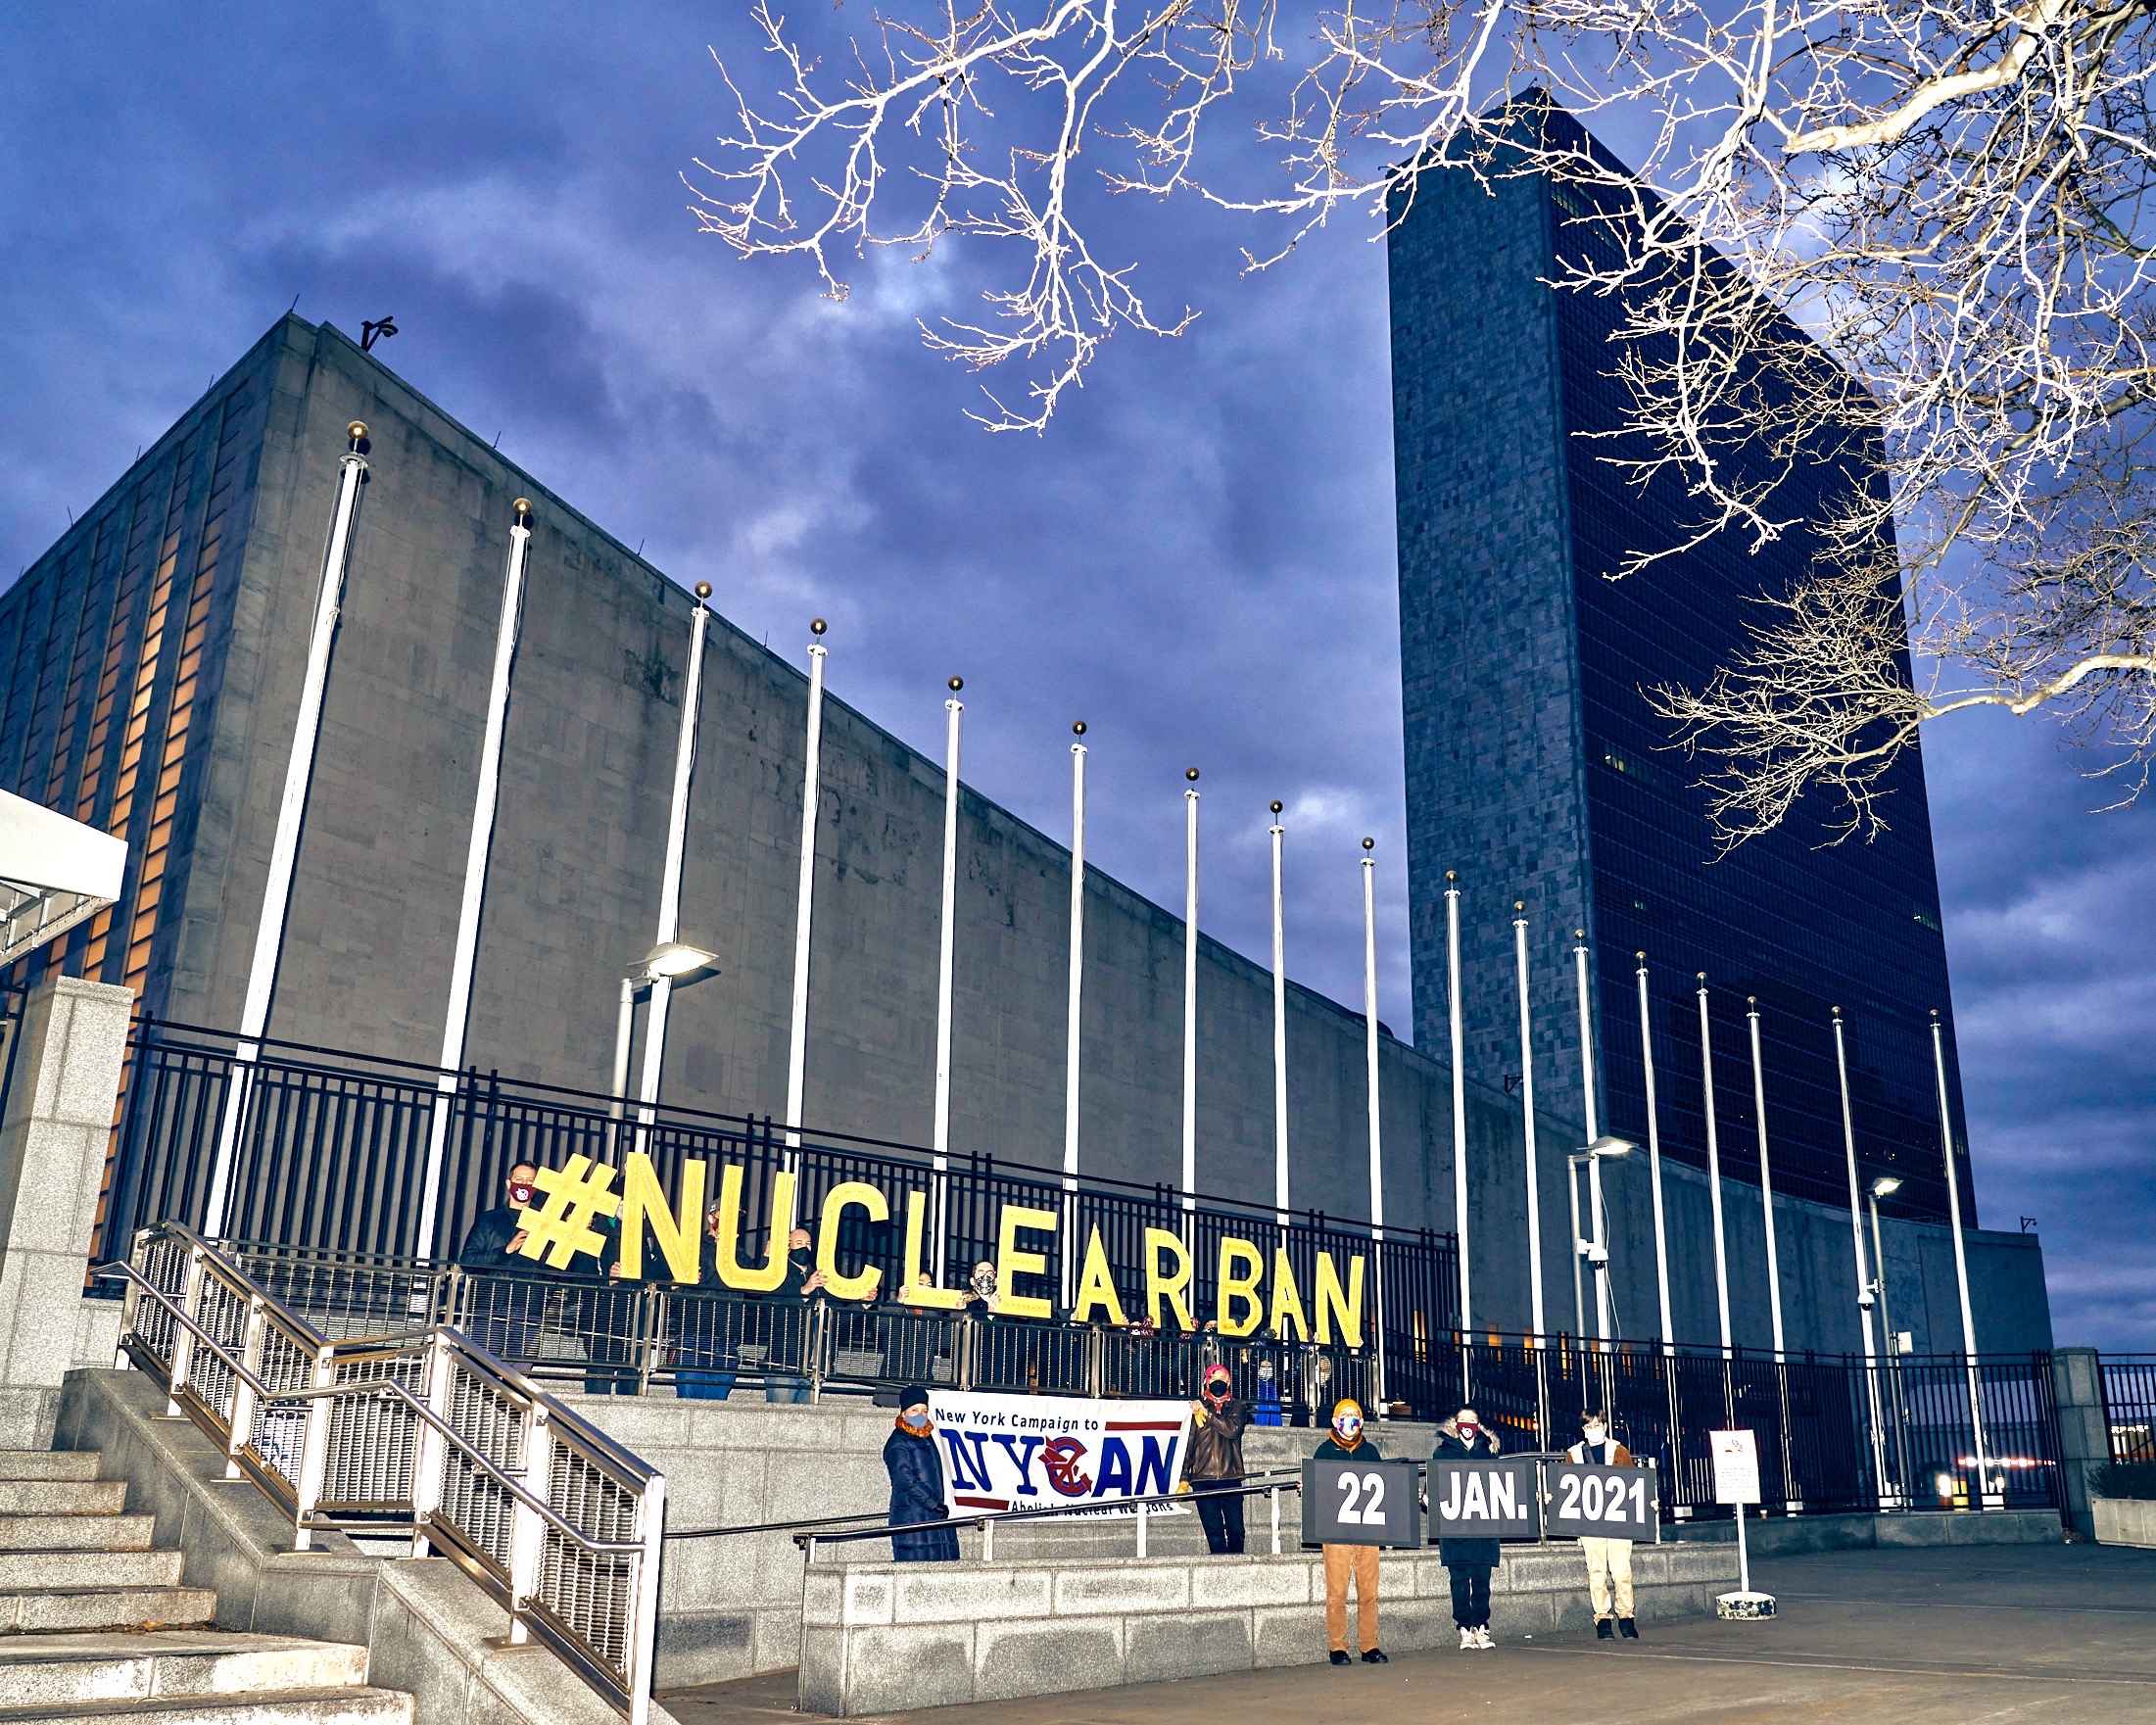 United Nations Headquarters with "#NuclearBan" banner